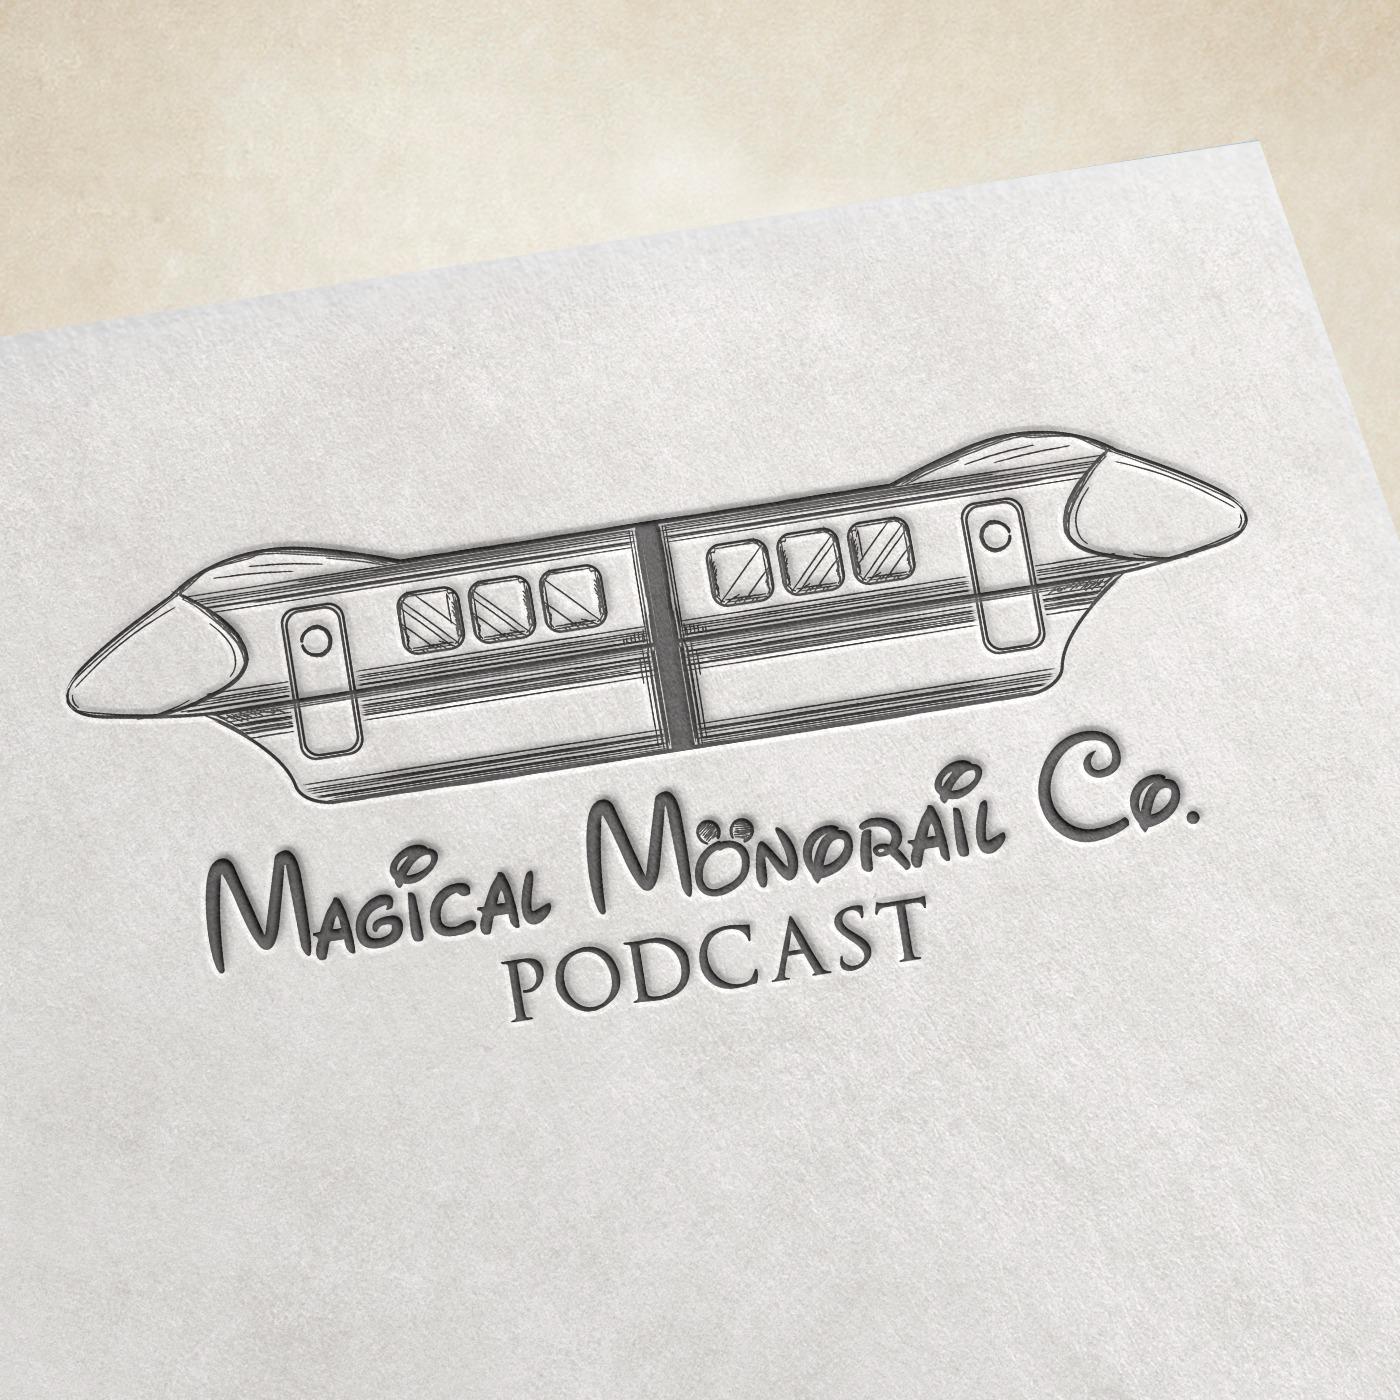 Magical Monorail Podcast